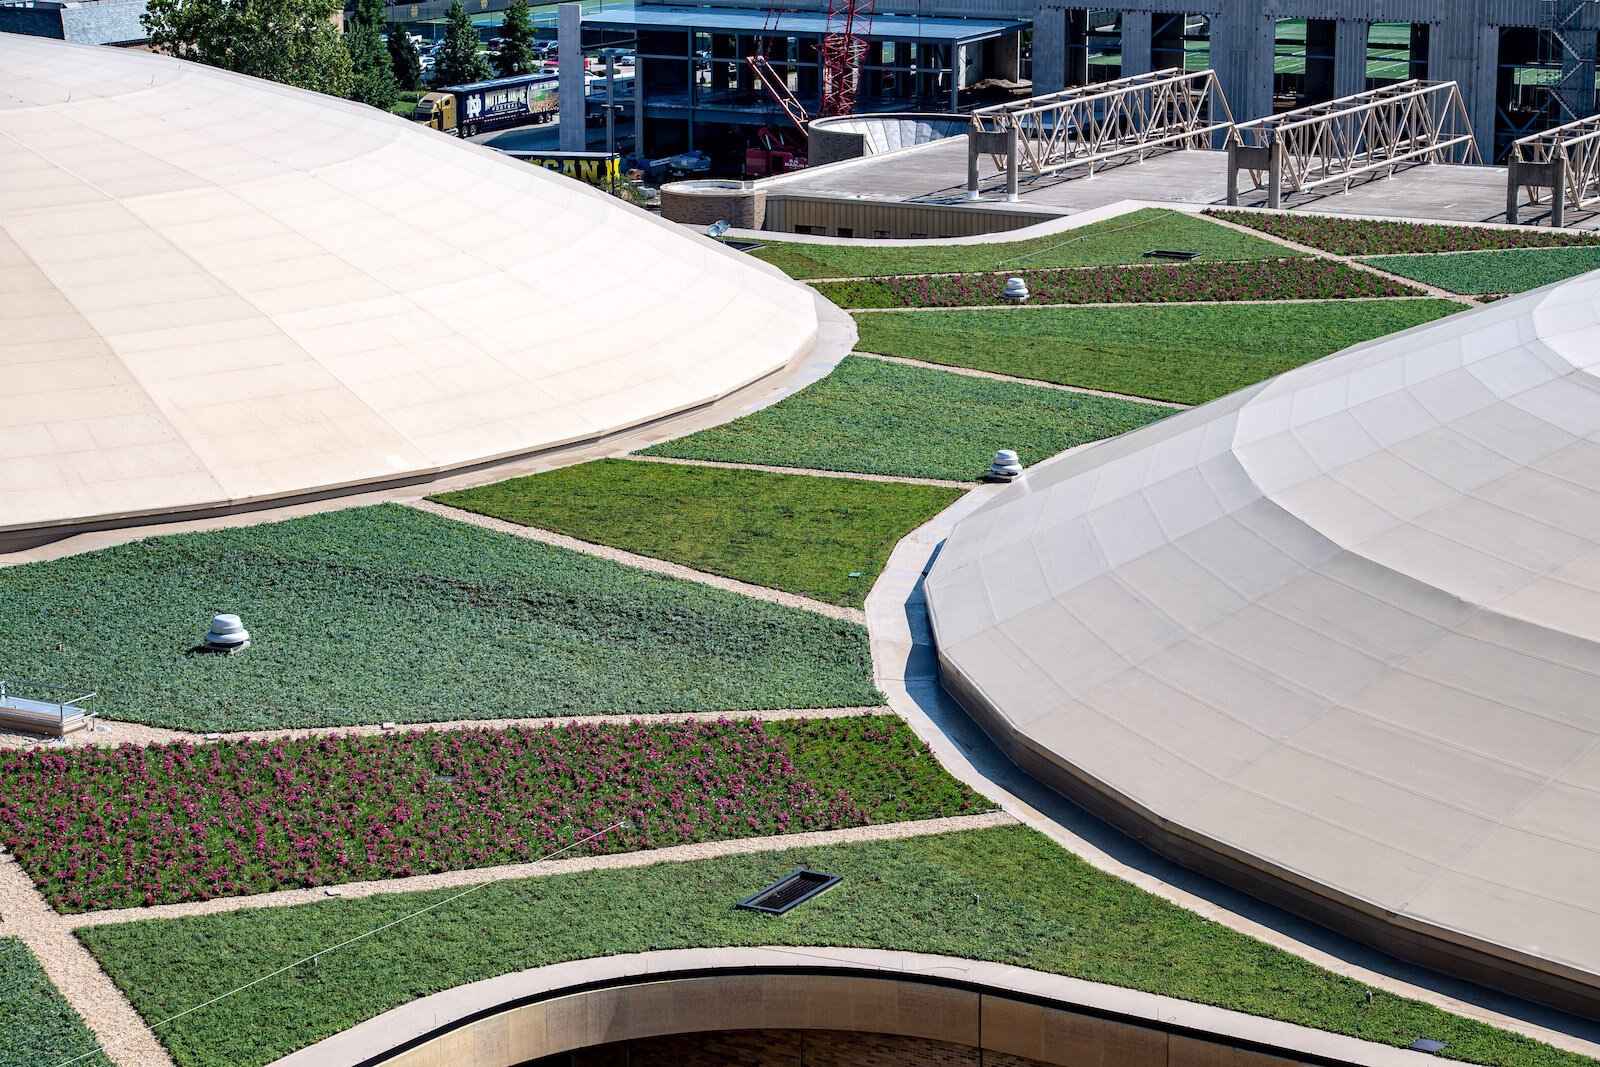 The green roof at Notre Dame's Joyce Center consists of 25 plant species, including 22 varieties of sedum, and a rooftop irrigation system.